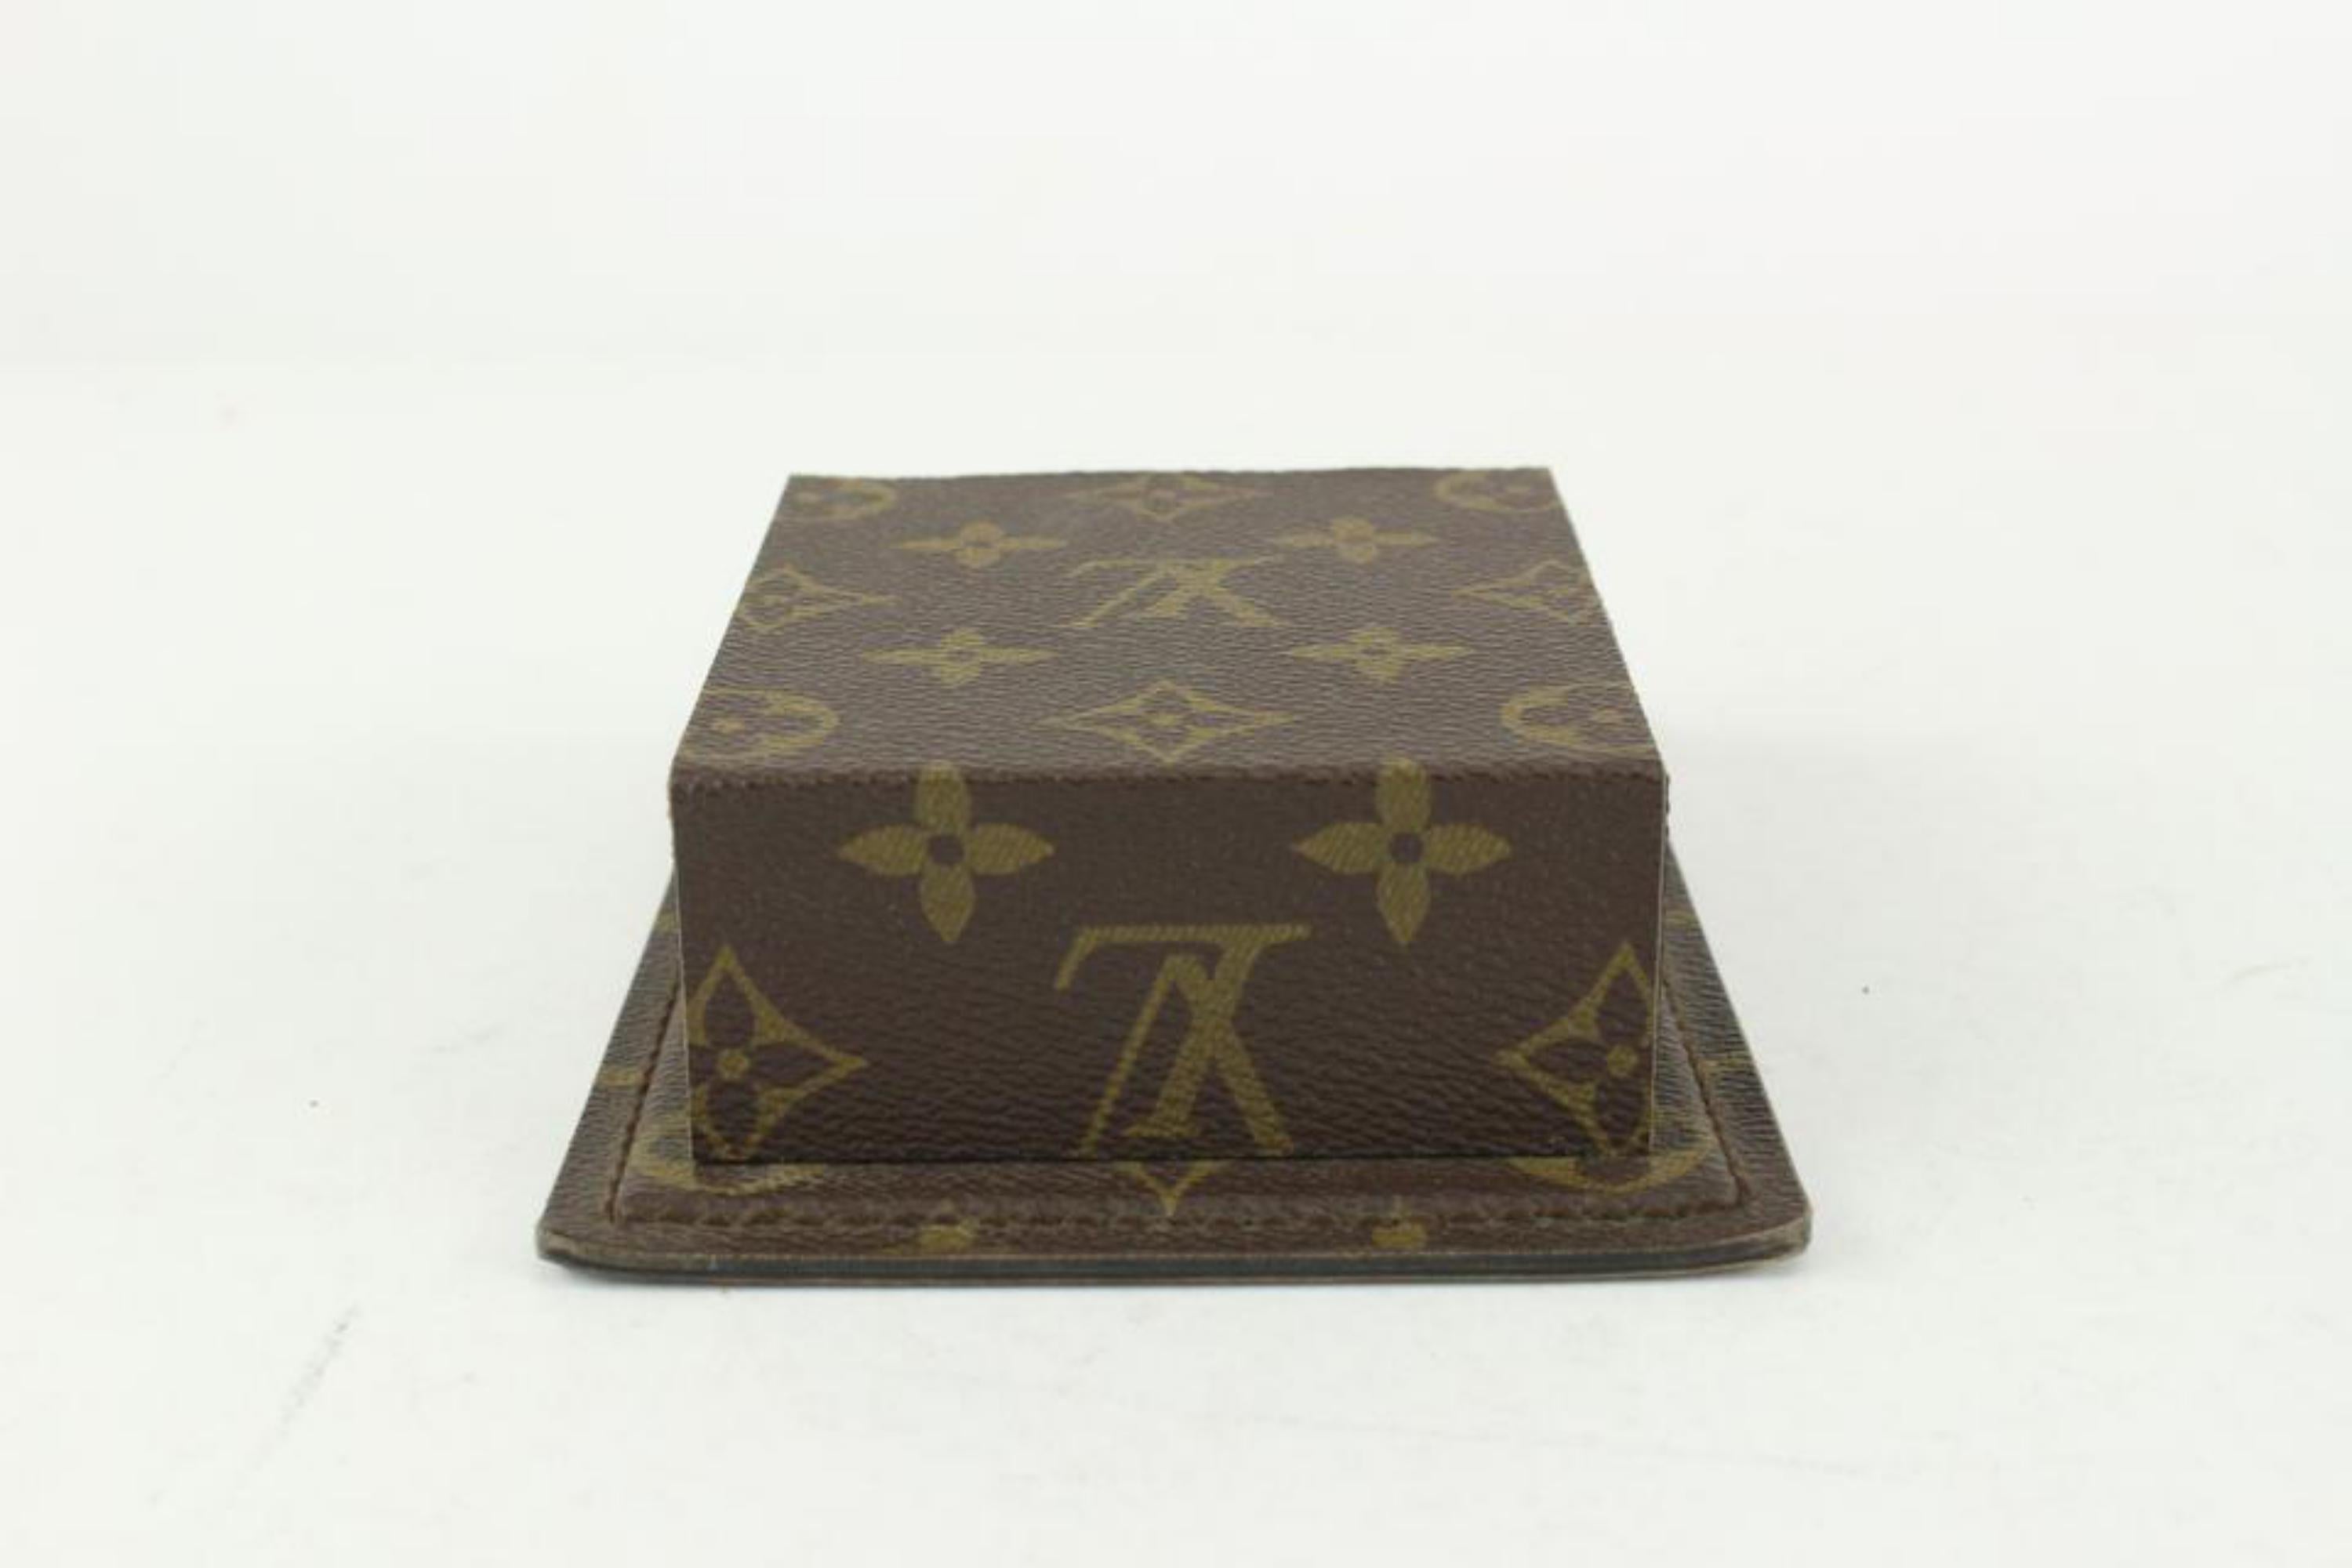 Louis Vuitton Impossible Find Monogram Desk Top Organizer 1122lv12 In Excellent Condition For Sale In Dix hills, NY